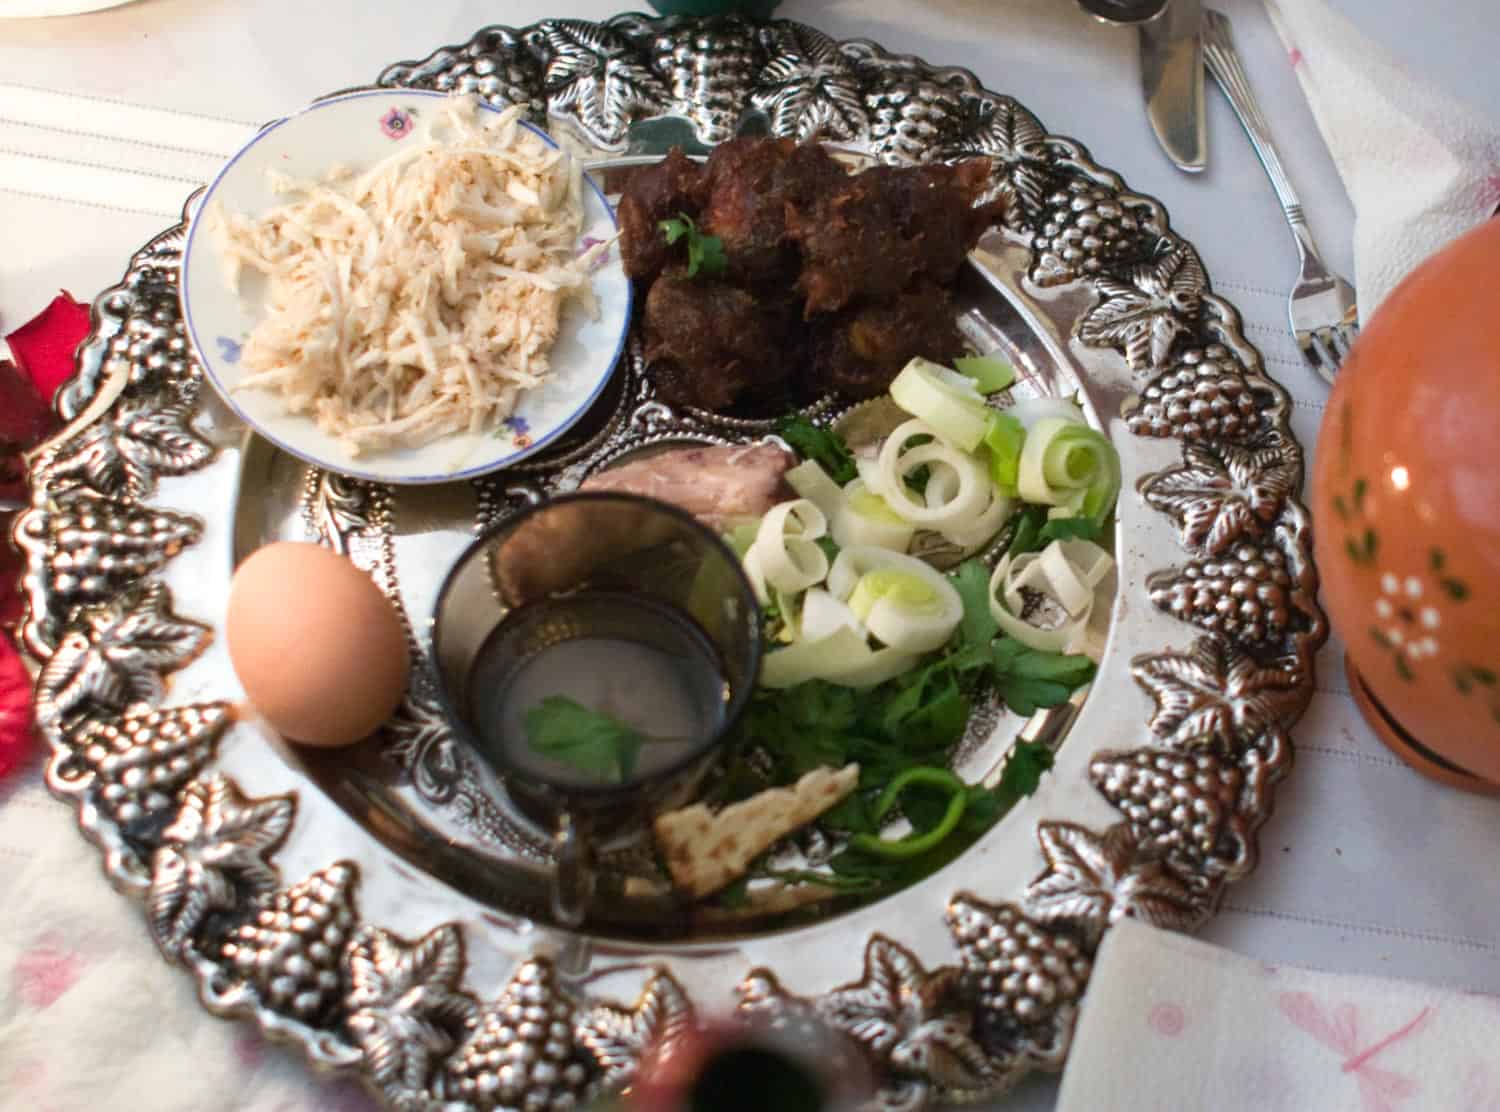 Passover seder plate with symbolic passover food.